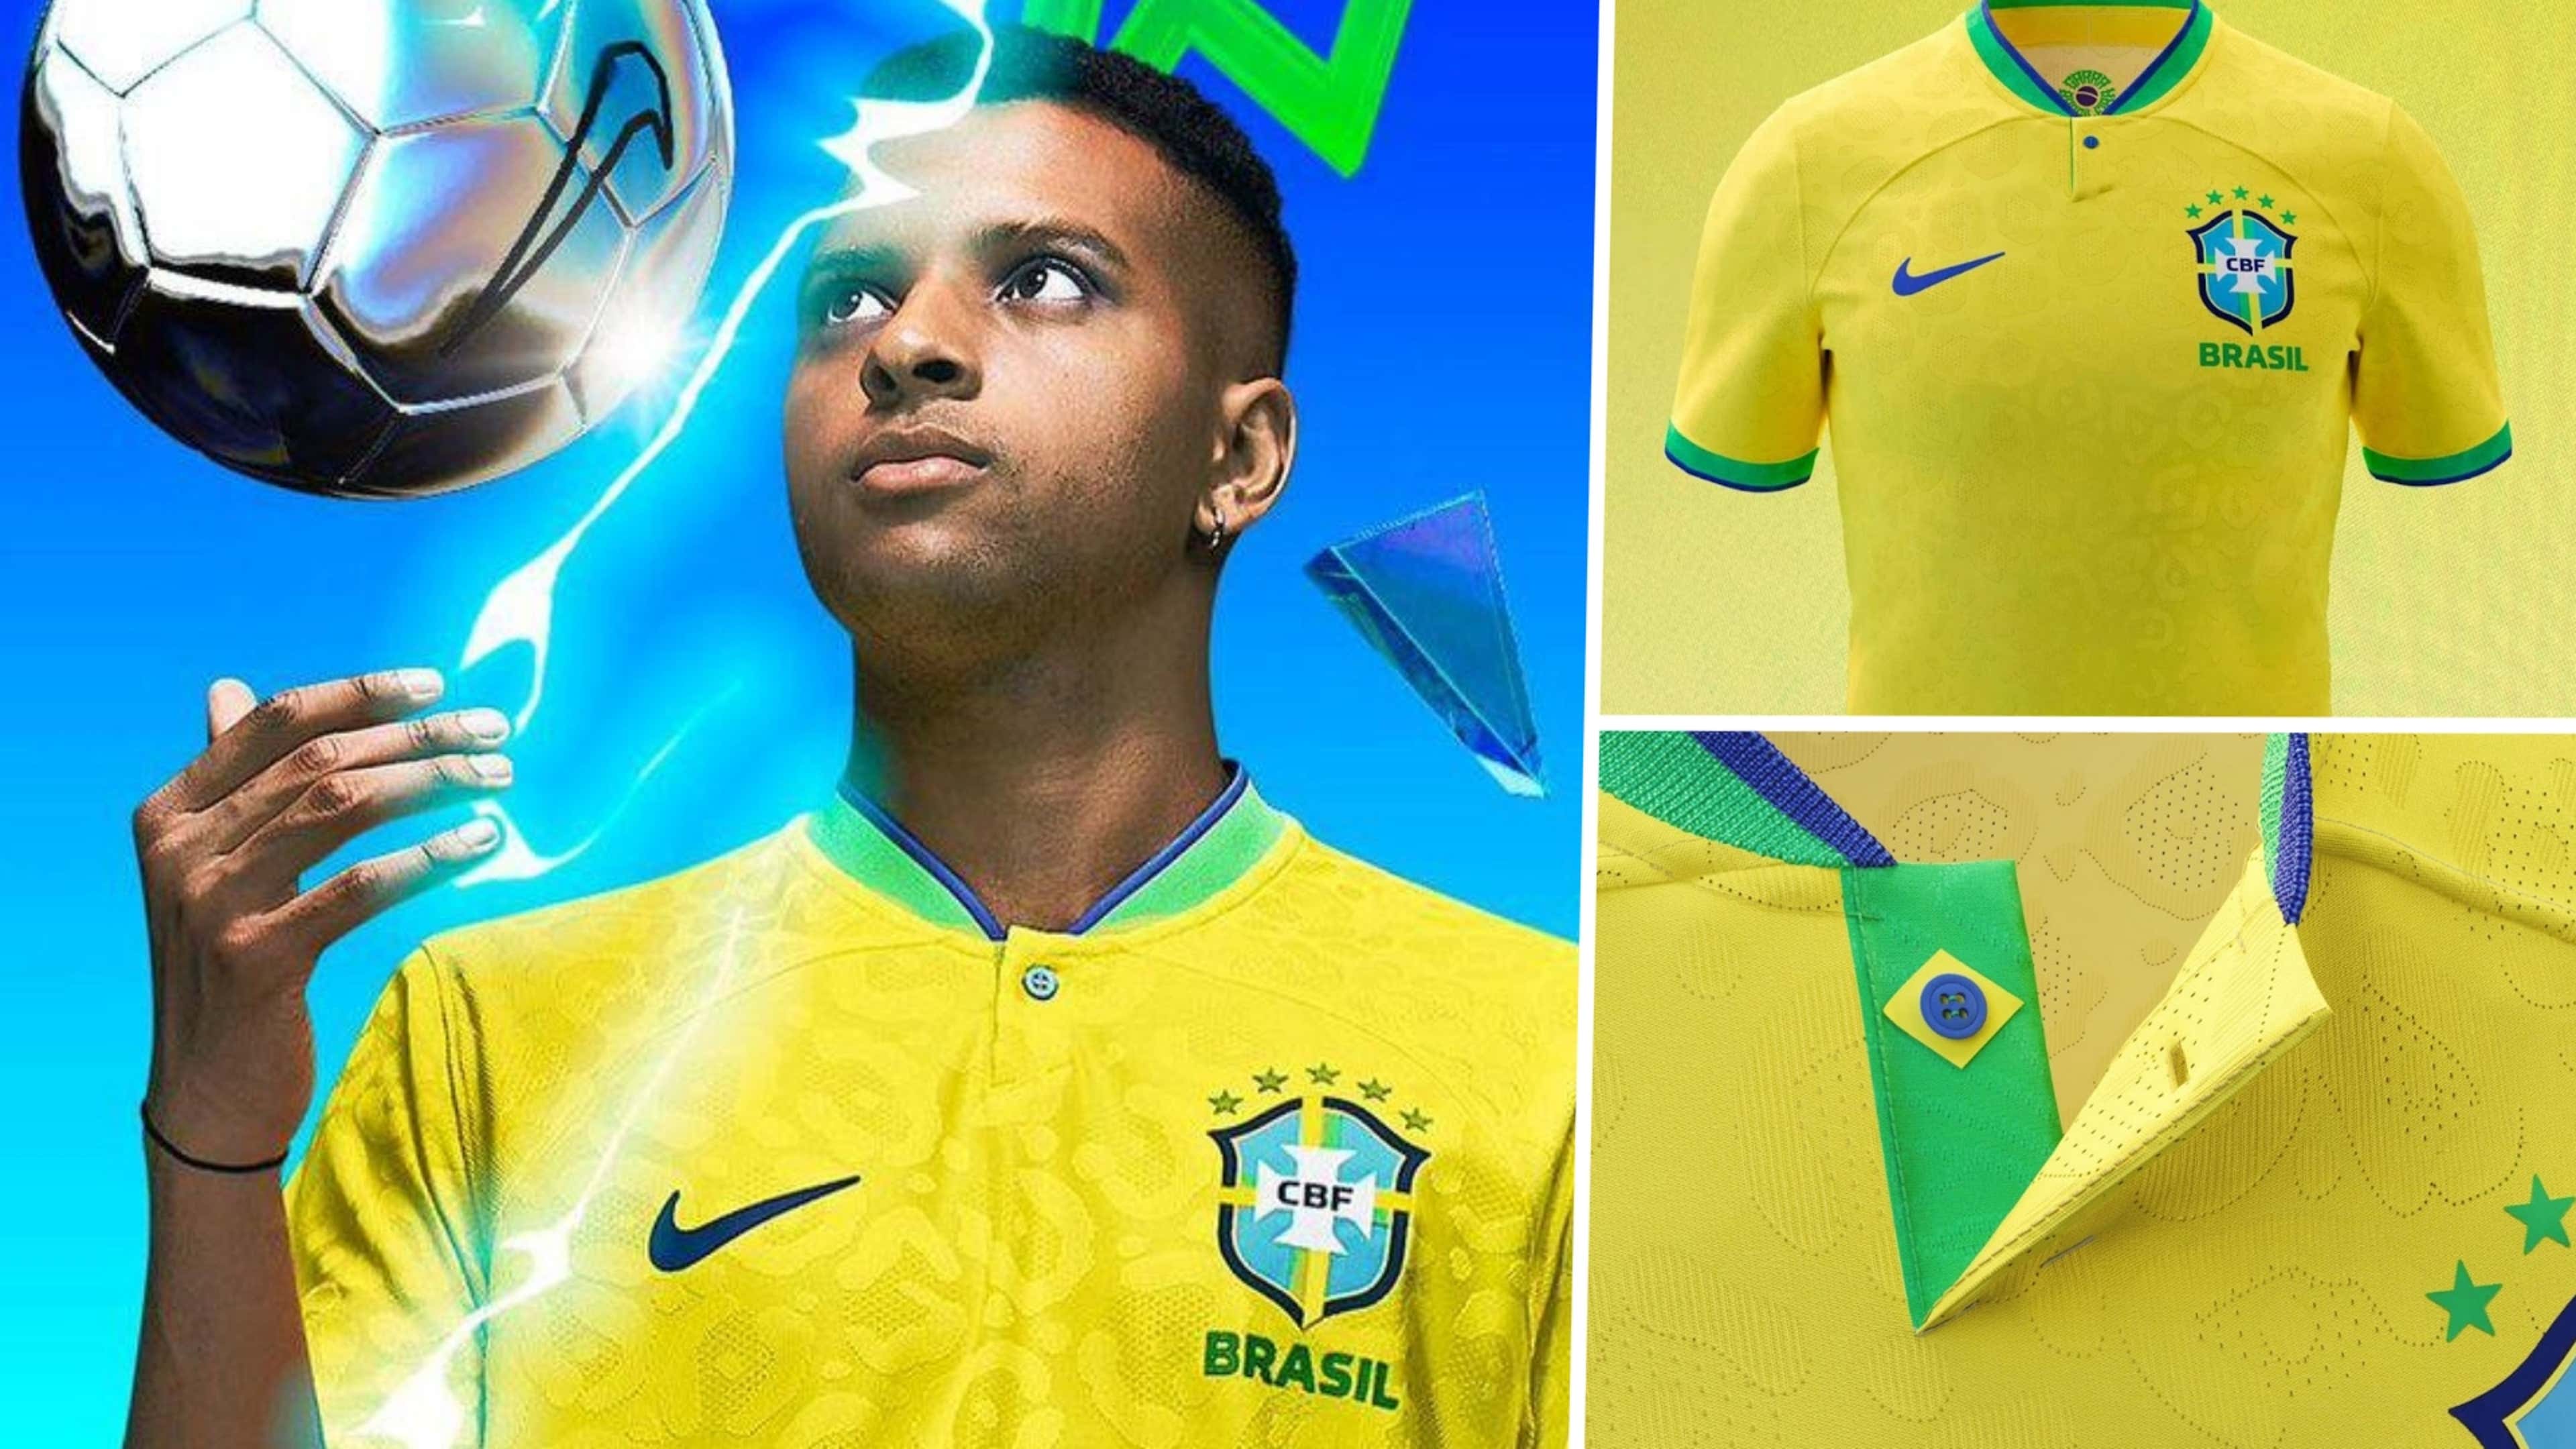 Neymar fashion: How to dress like PSG's slick Brazil star without selling  your house